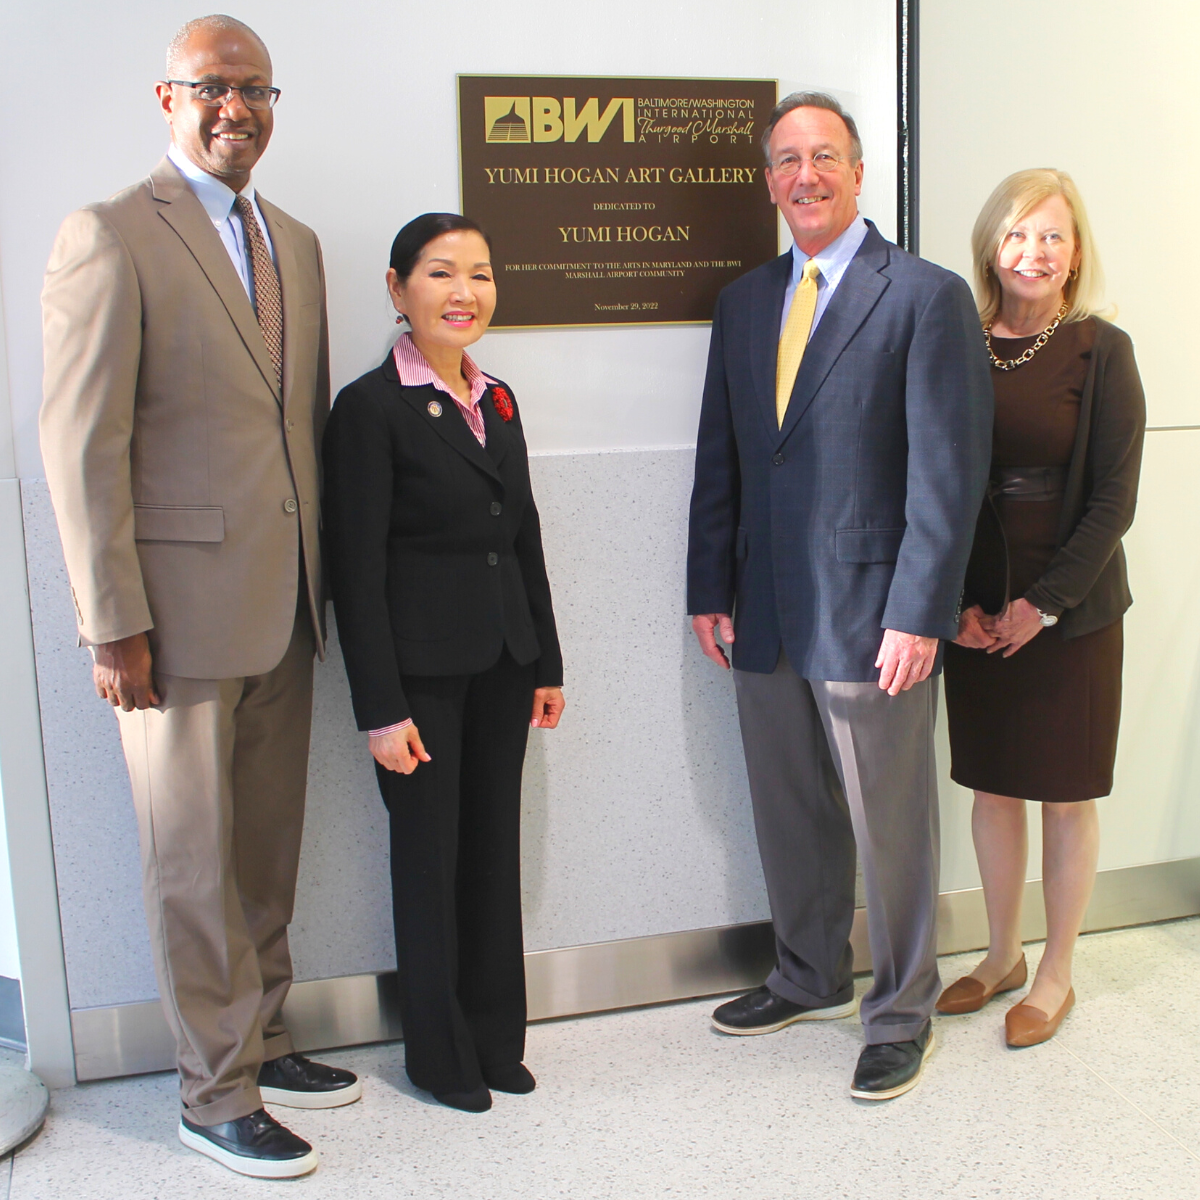 Photo of BWI Marshall Airport Executive Director Ricky Smith, Maryland First Lady Yumi Hogan, Maryland Department of Transportation Secretary Jim Ports and Arts Council of Anne Arundel County Executive Director April Nyman standing near a sign commemorating the renaming of the Yumi Hogan Art Gallery space at BWI Marshall Airport